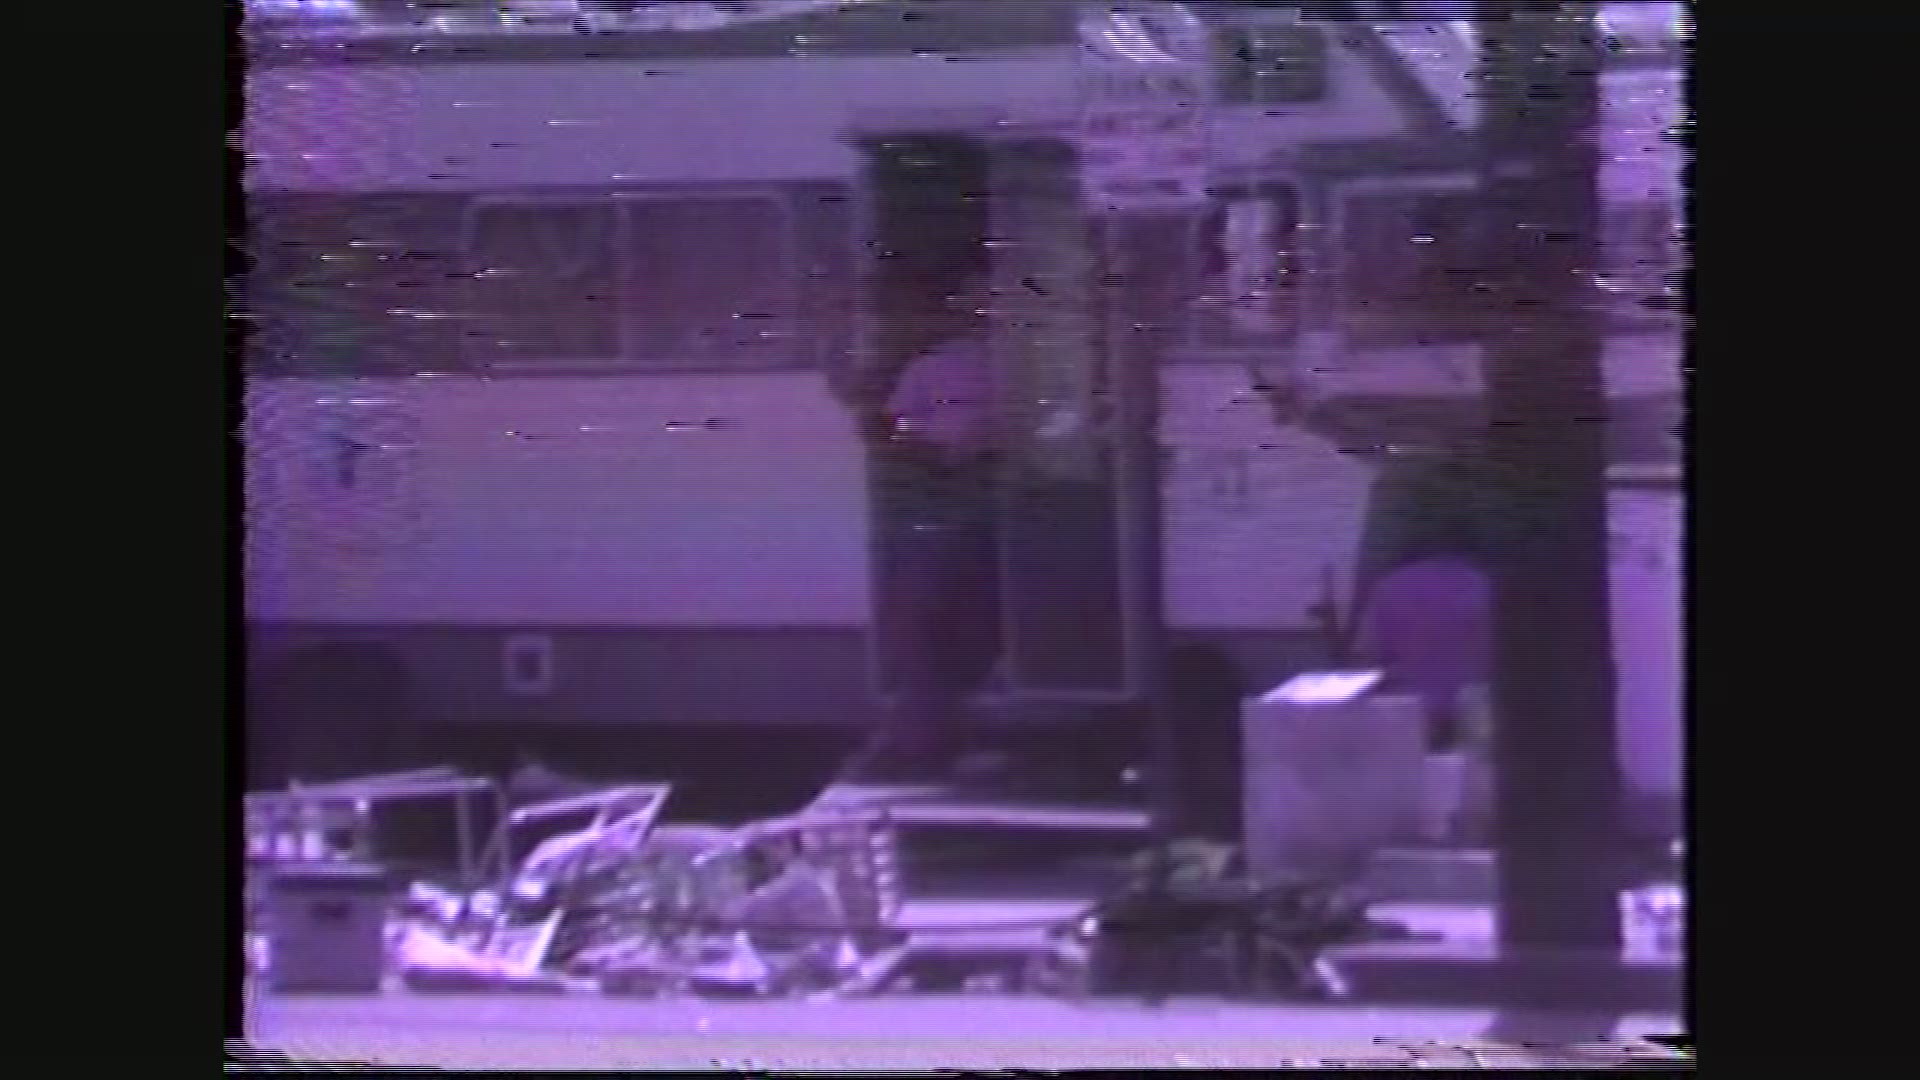 Raw scene footage at the 1979 Battle of Flowers Parade where 2 were killed and more than 50 were injured paints a chaotic scene. One witness, who identified himself as a veteran, spoke with KENS 5 and compared the shooting to being in Vietnam. "I couldn't tell you what color he was, all I could tell you was the son of a bitch was crazy."